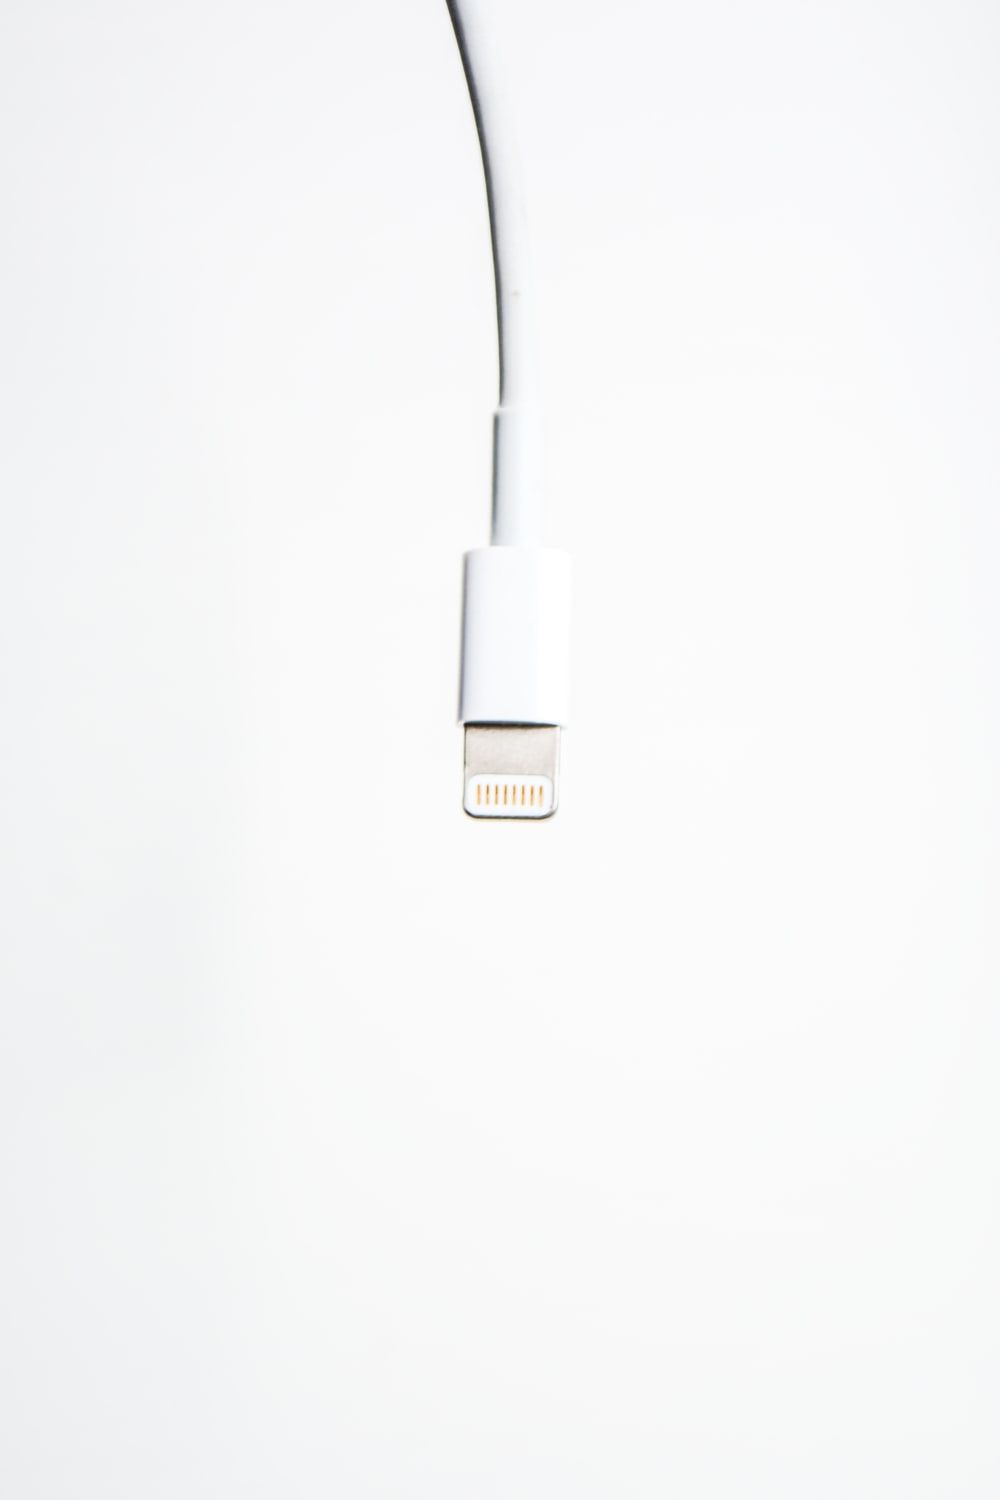 iPhone Charger Picture [HD]. Download Free Image